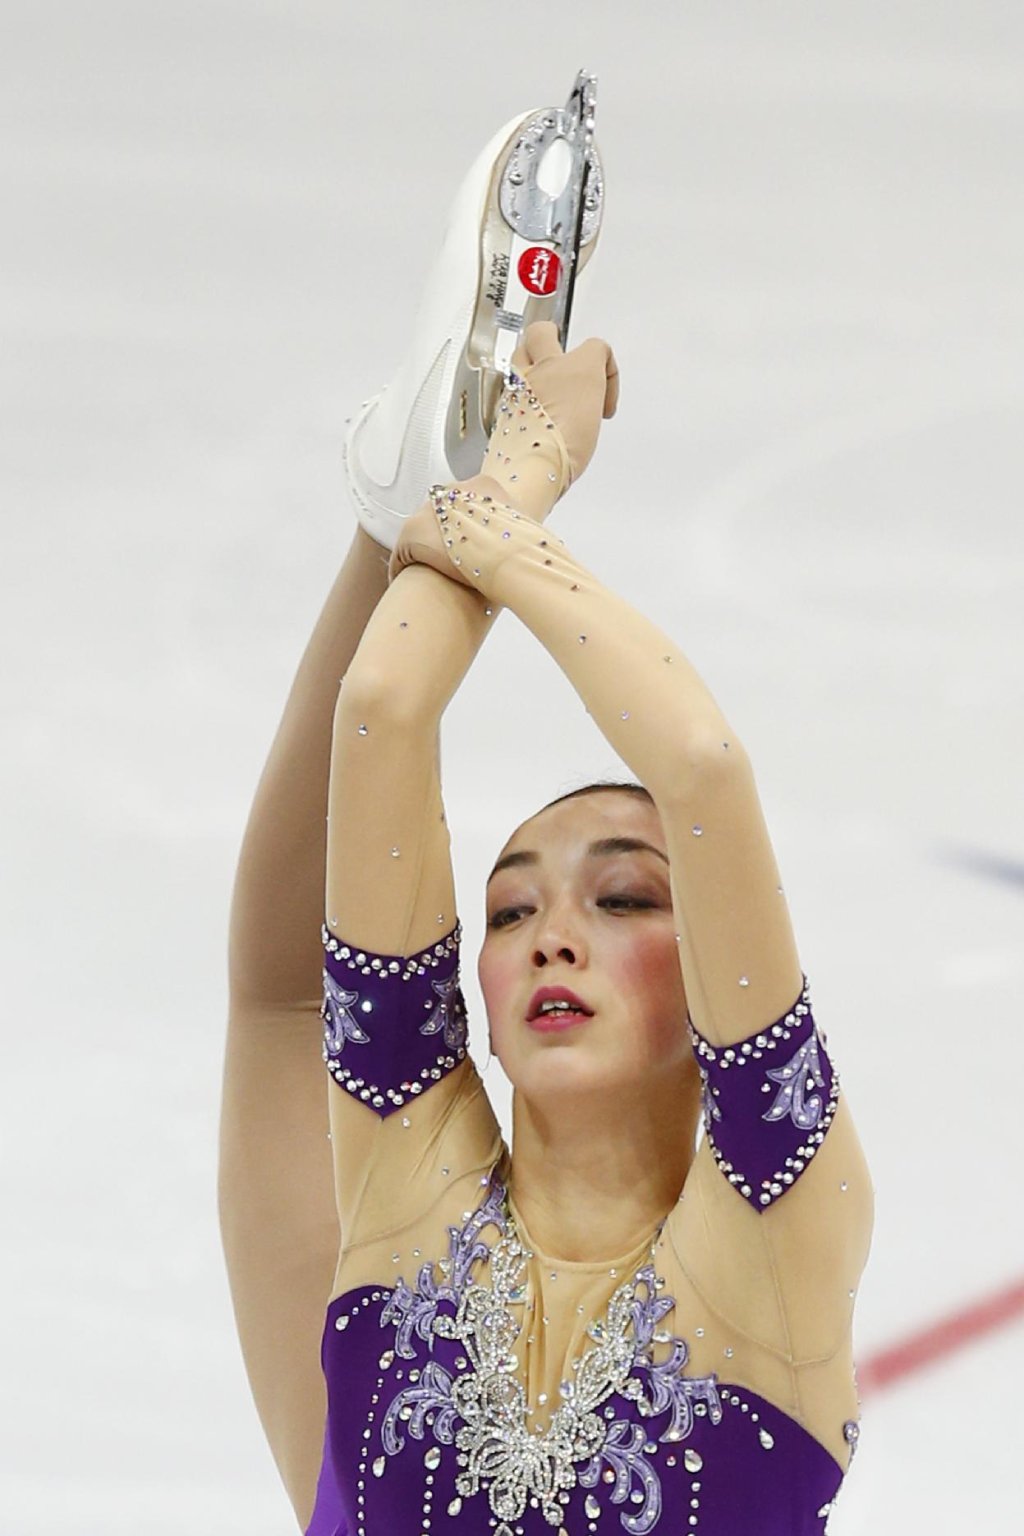 Japan's Rika Hongo performs during the Cup of Russia ISU фото (photo)